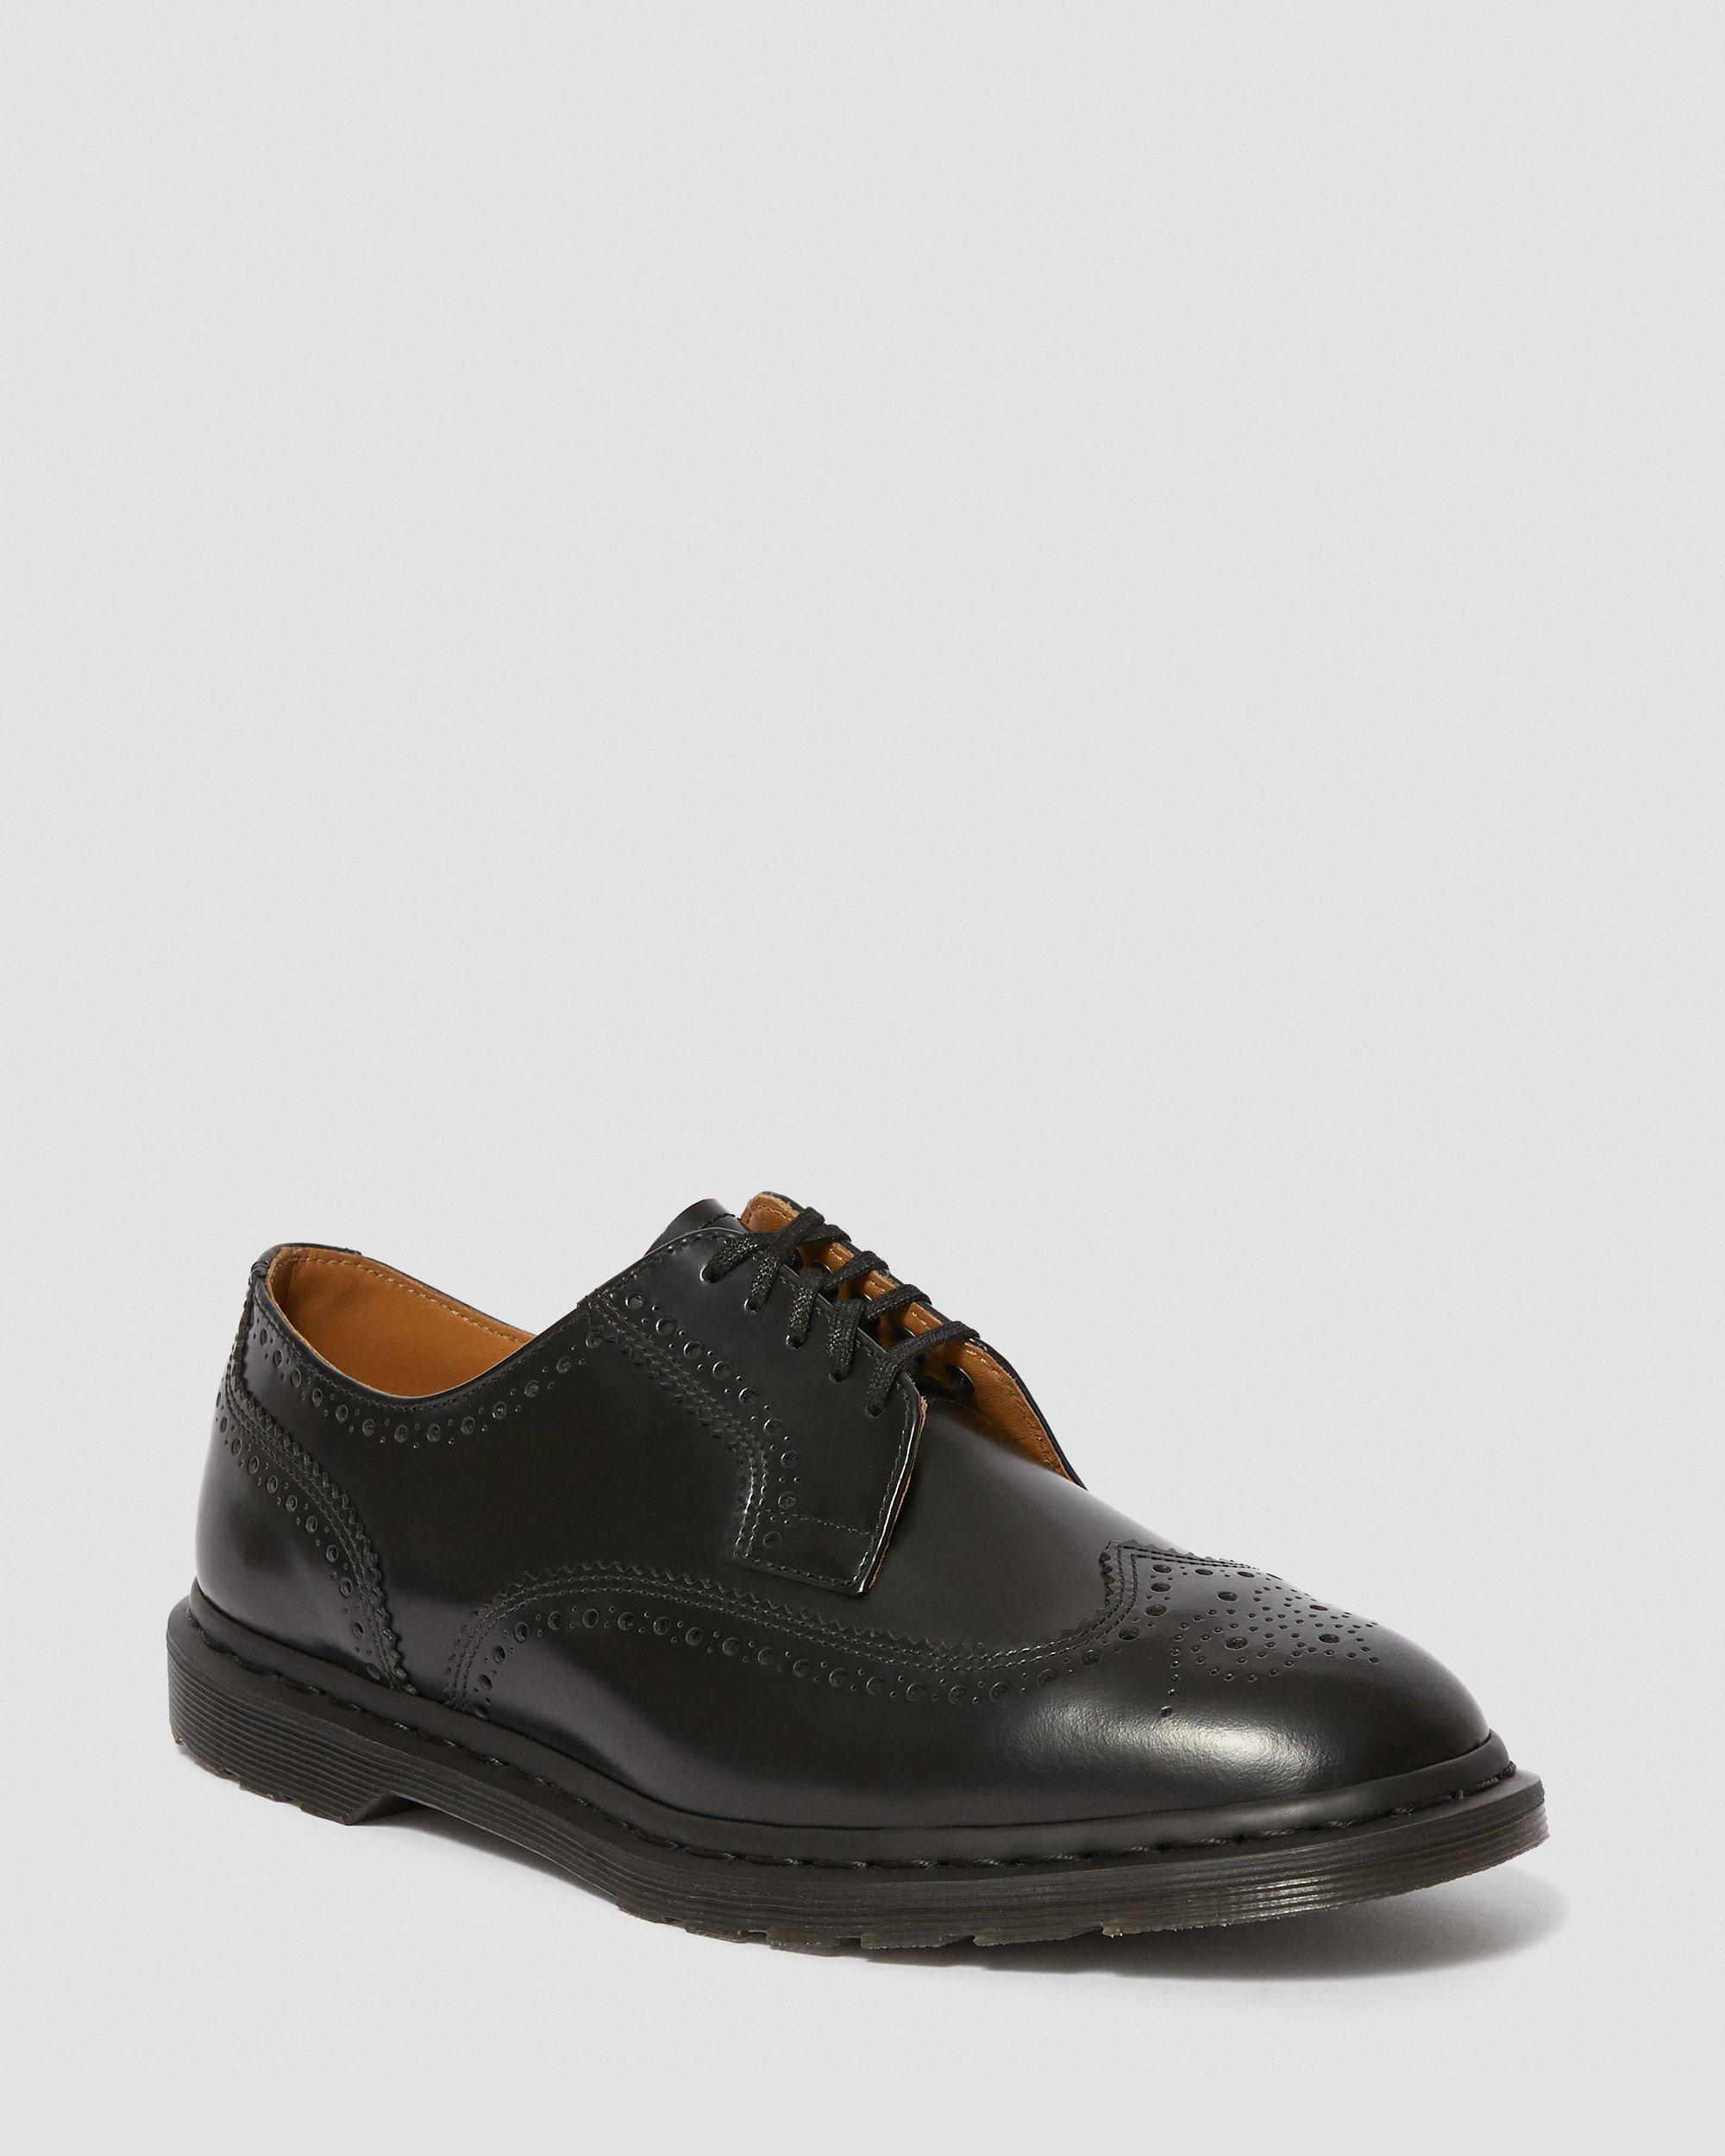 KELVIN II SMOOTH LEATHER BROGUE SHOES | Dr. Martens